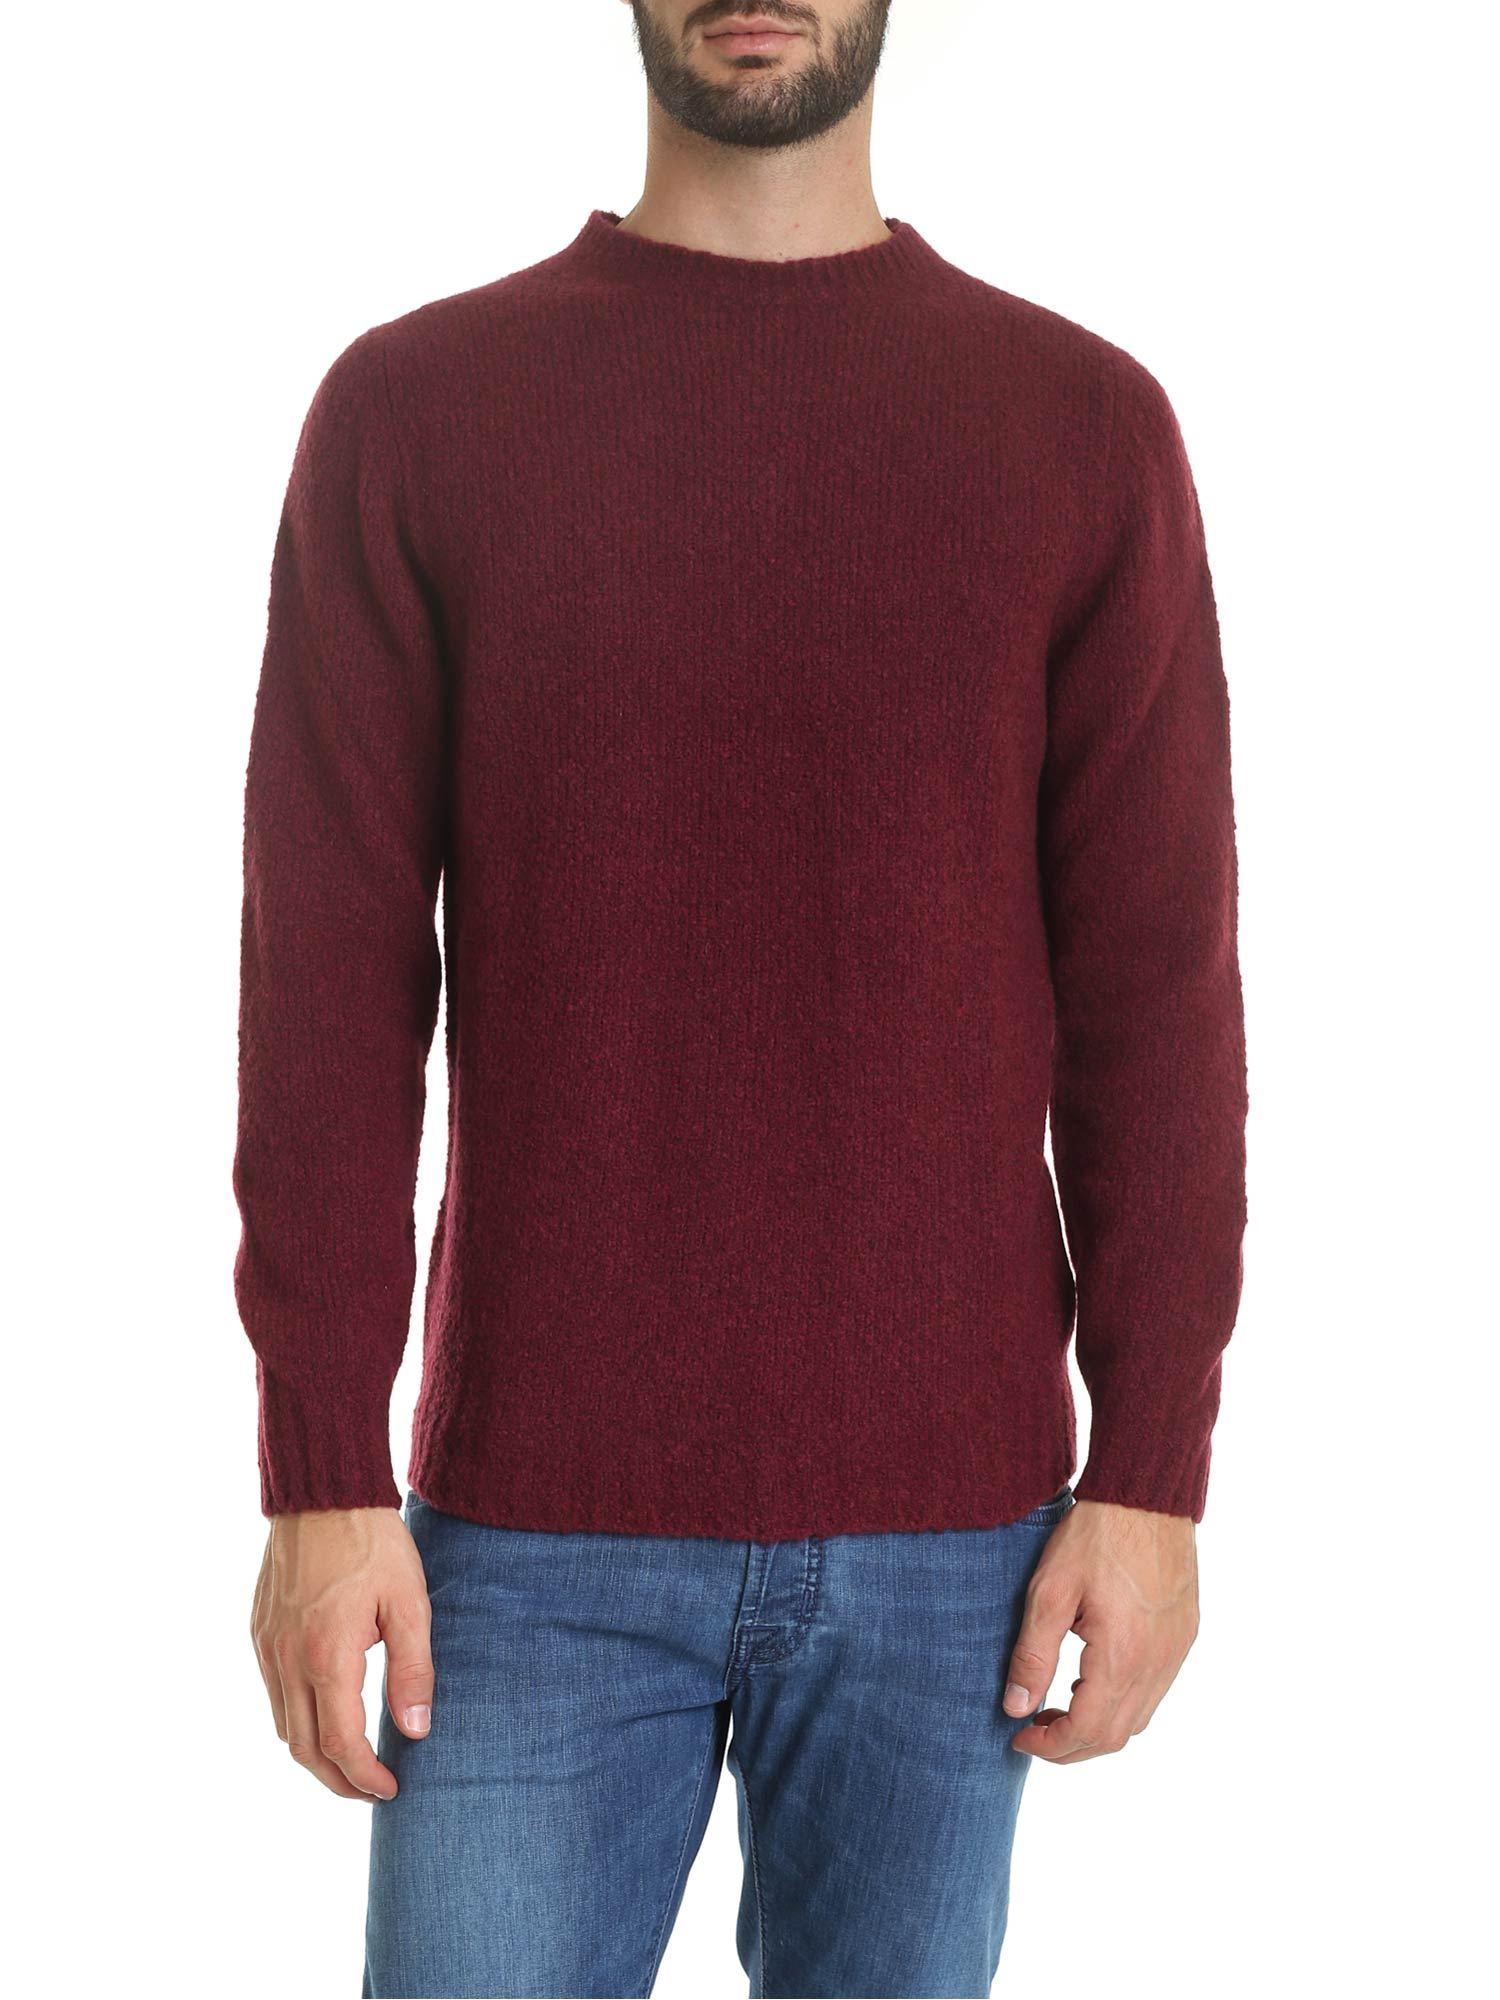 Fedeli Wool And Cashmere Pullover in Red (Purple) for Men - Lyst